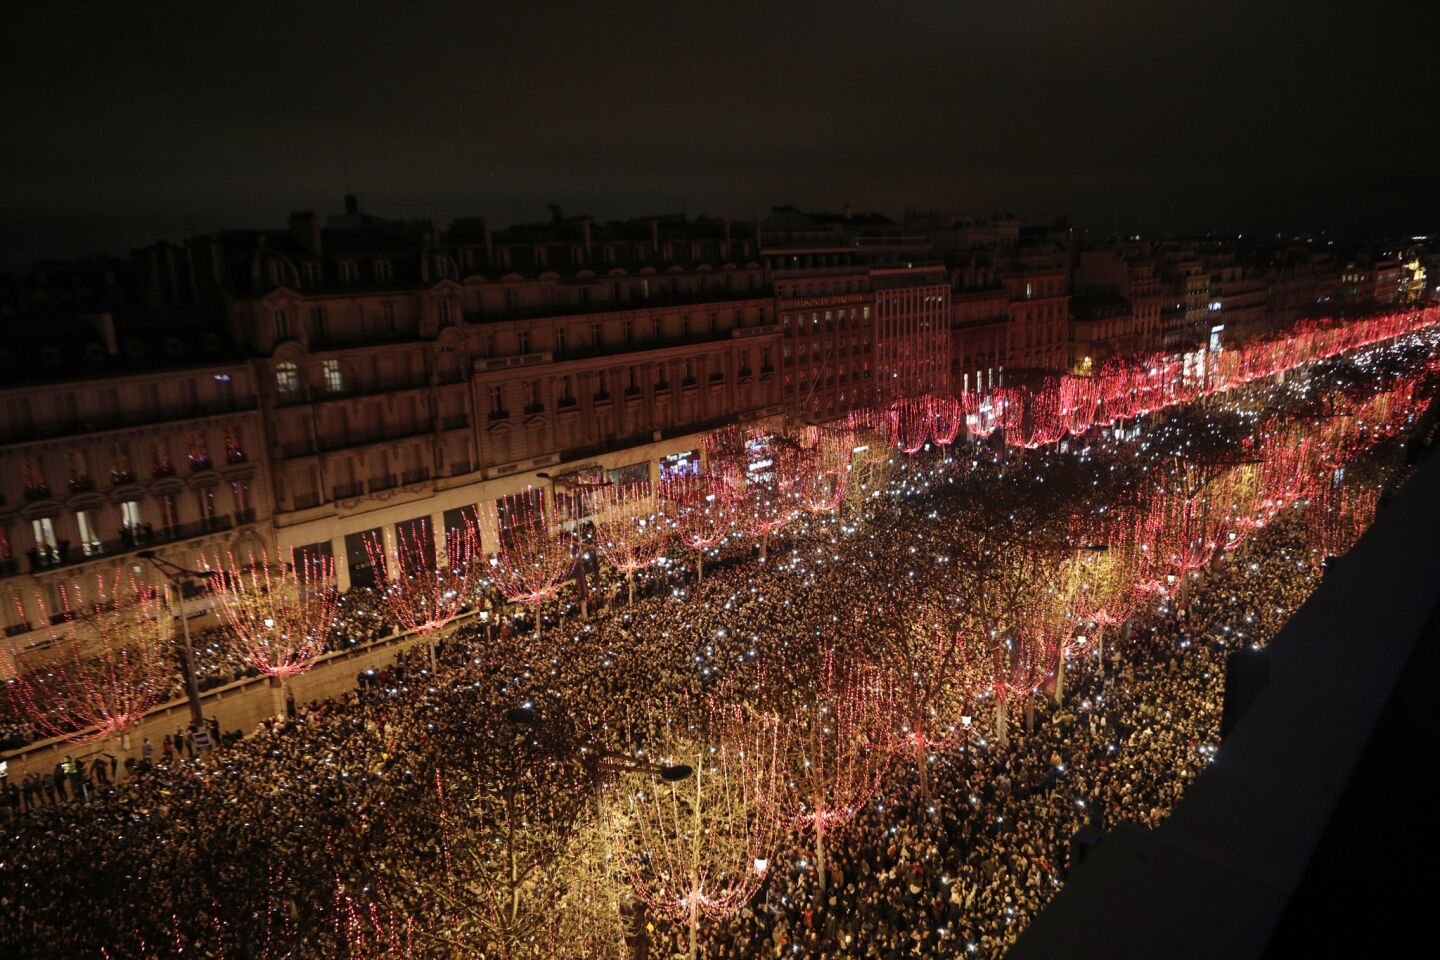 The Champs Elysees in Paris is thronged with New Year's revelers.